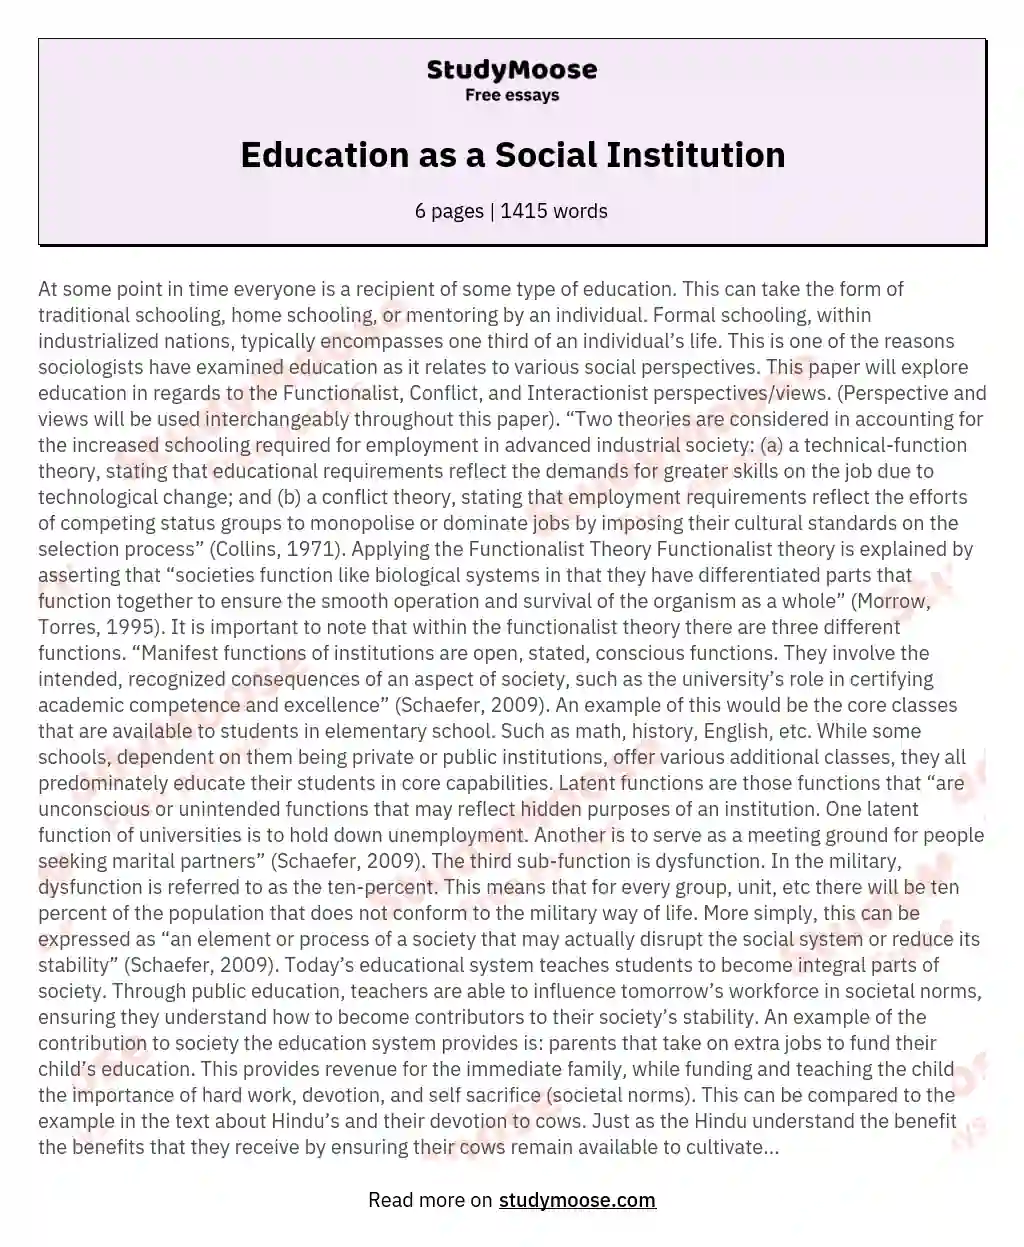 Education as a Social Institution essay